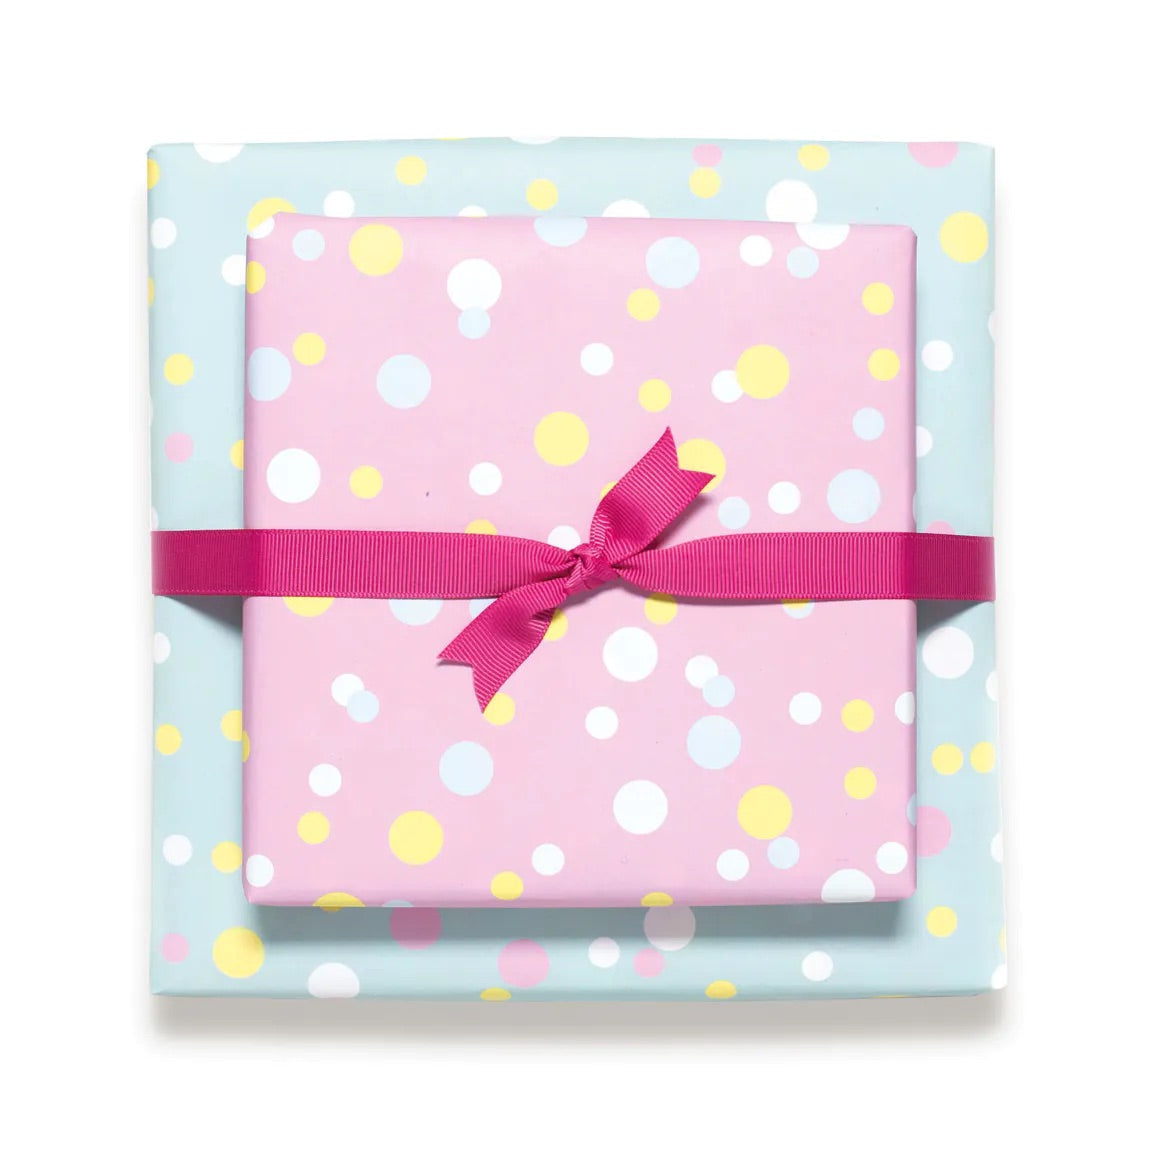 Recycled Double Sided Wrapping Paper - For Eco-friendly and versatile creative gift presentation